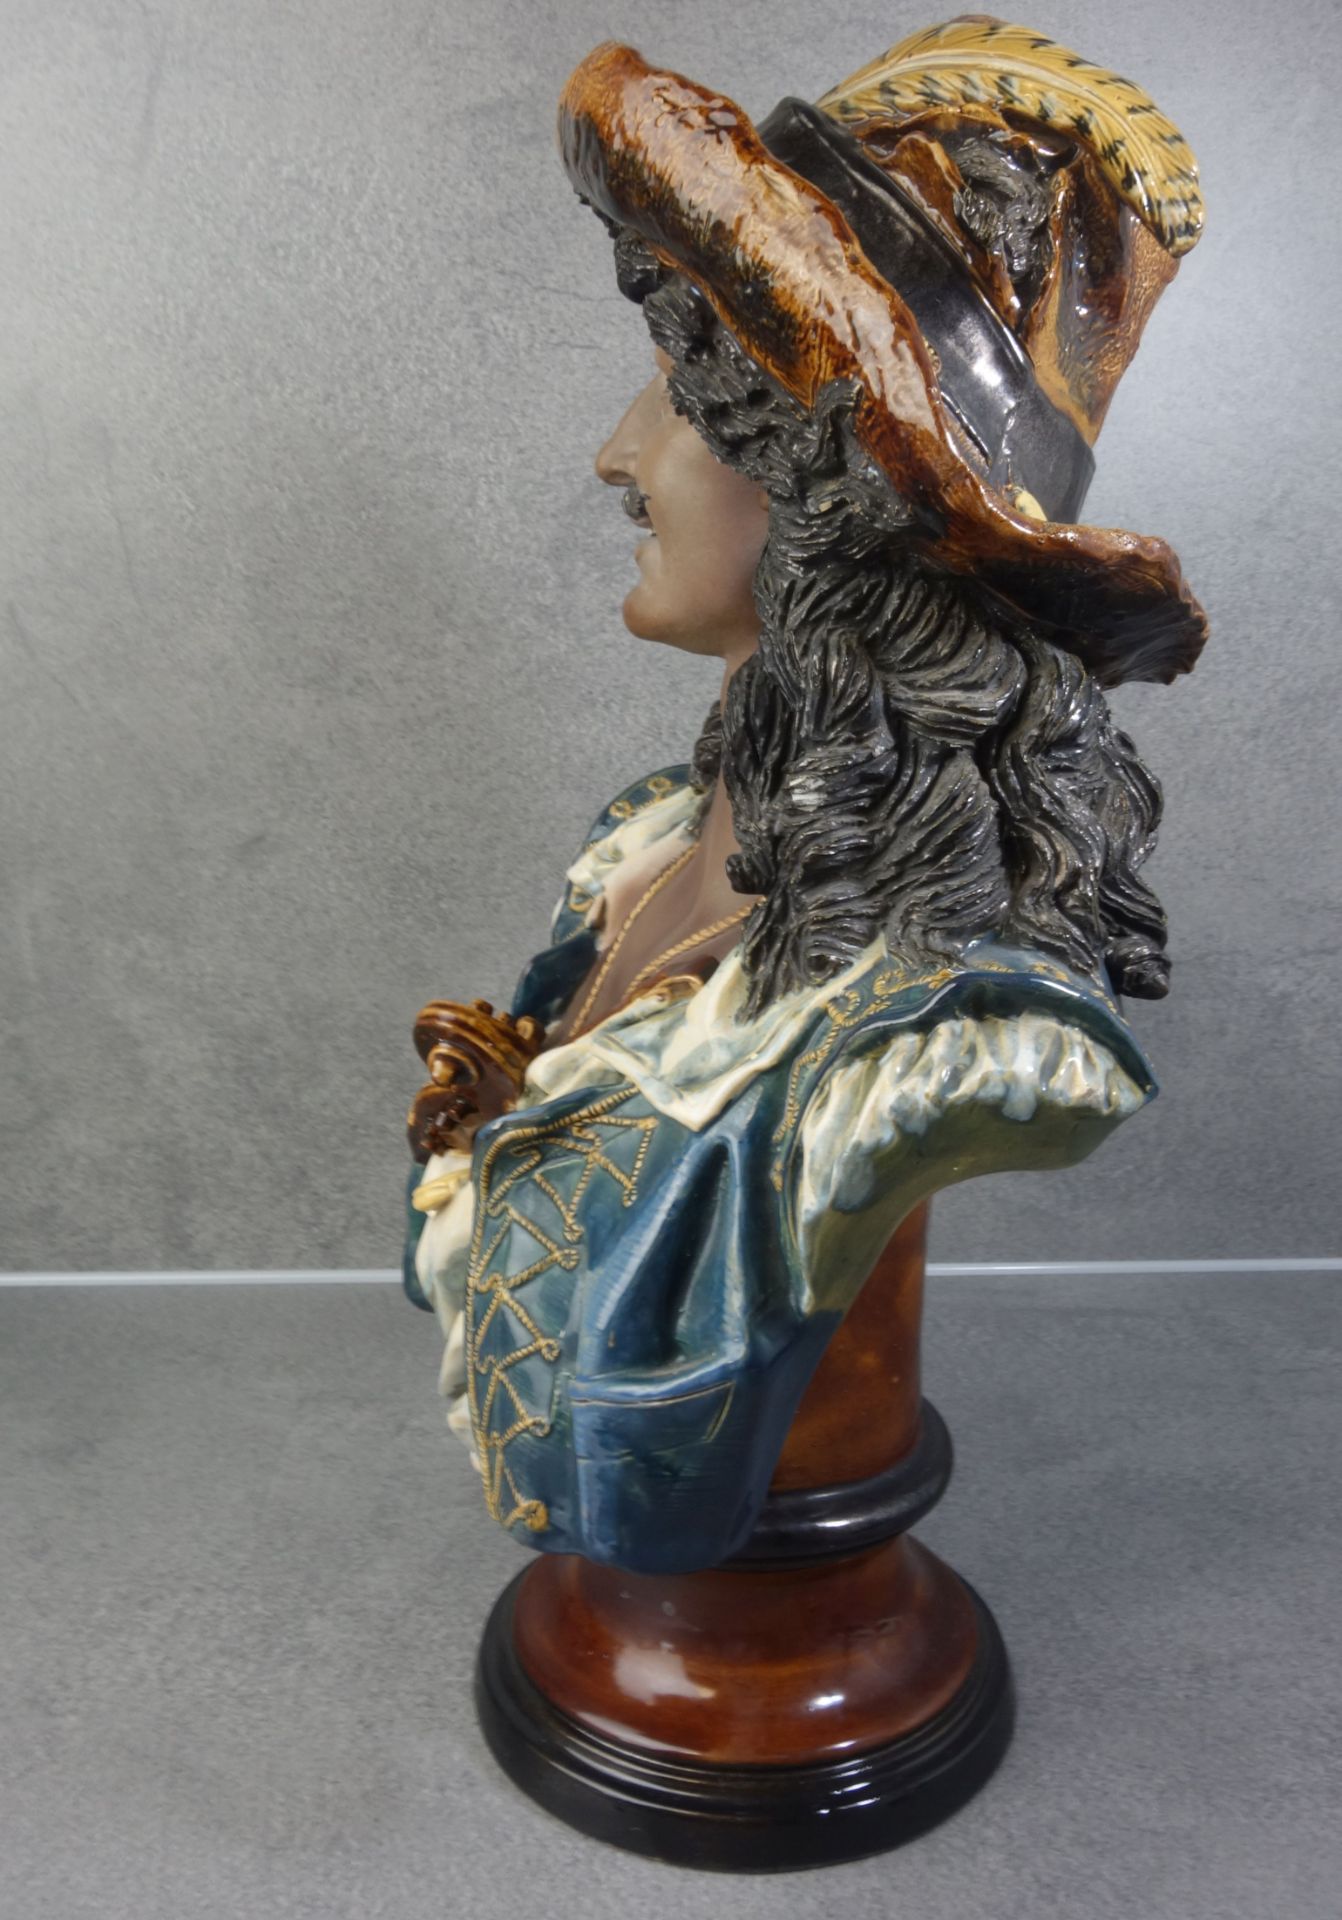 R. STURM SCULPTURES: "MUSICIAN" AND "FORTUNE TELLER" - Image 5 of 6